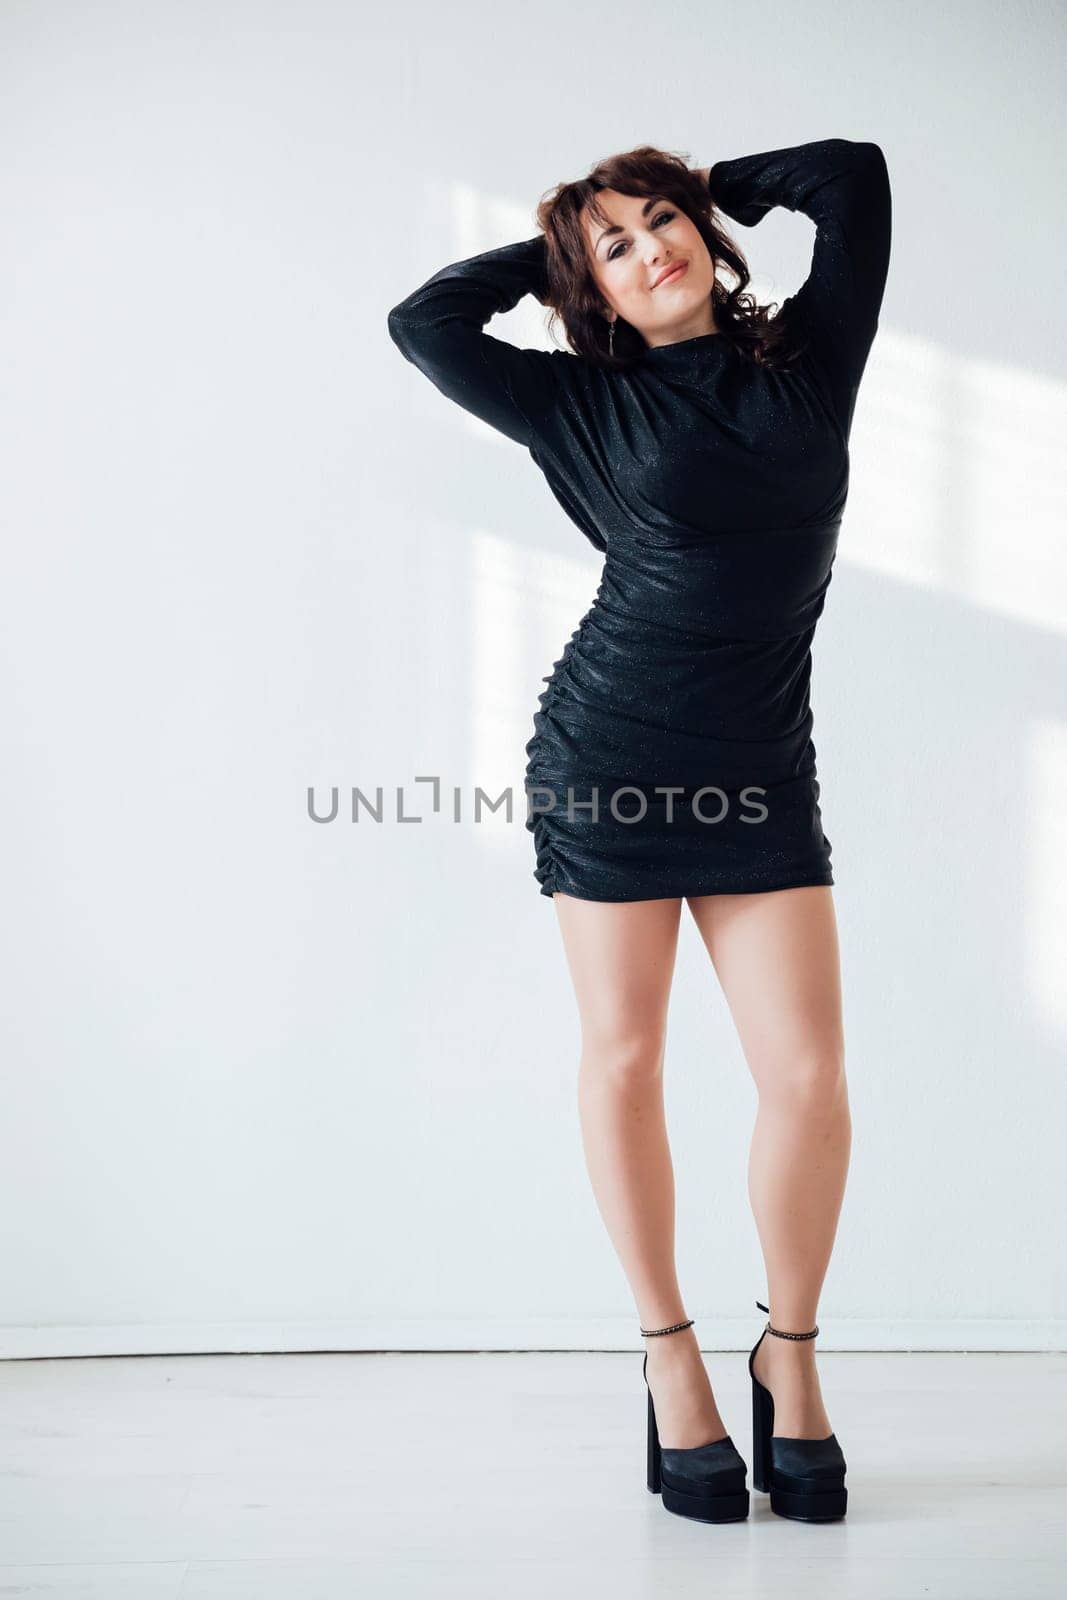 woman in a black dress stands against a white wall in the background